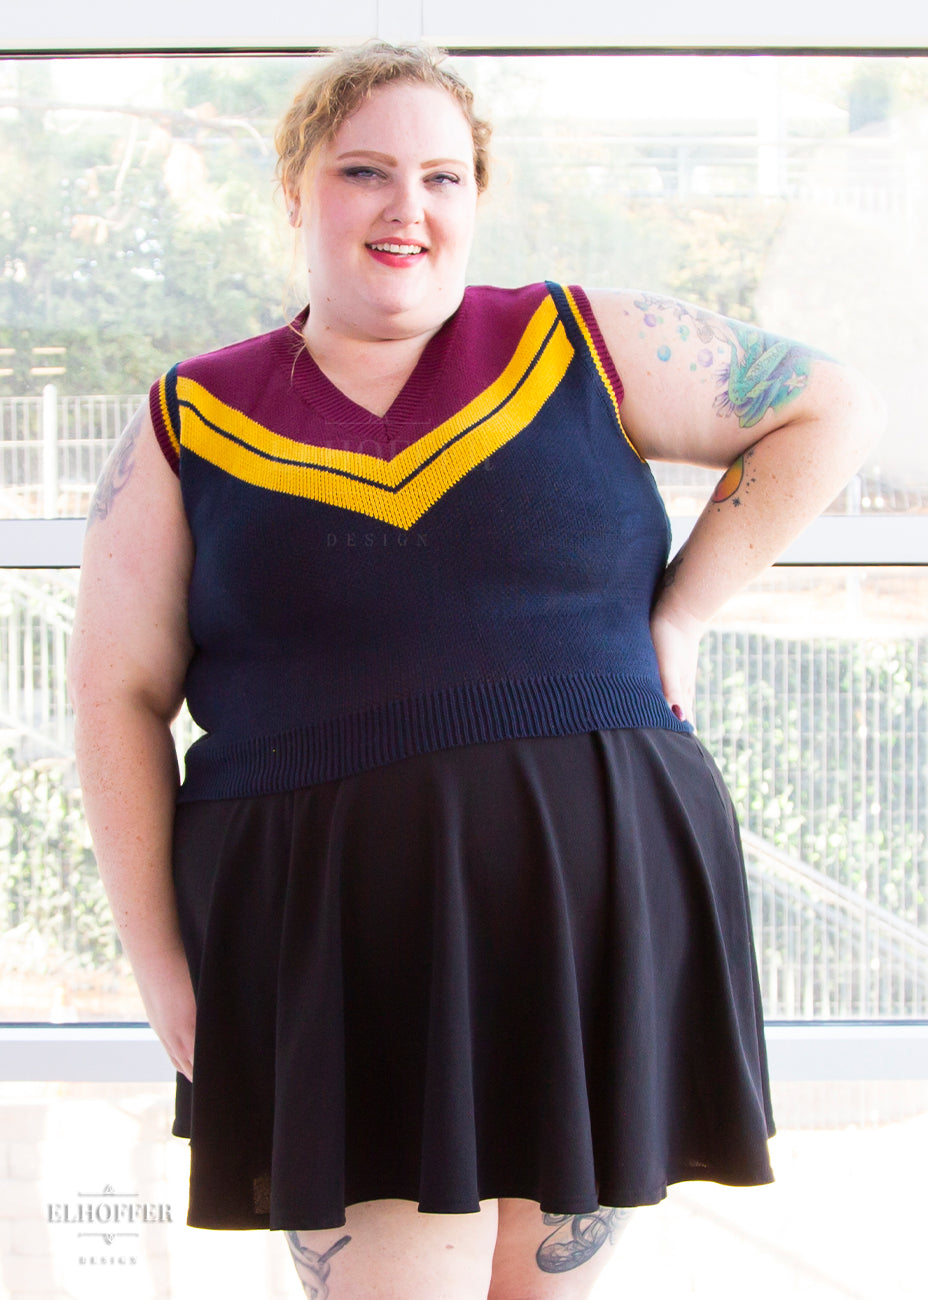 Bee, a size 3XL fair skinned model with ginger hair, is wearing a pullover vest with a boxy fit and v-neck. It is navy blue with a deep red neckline and mustard yellow v detail.